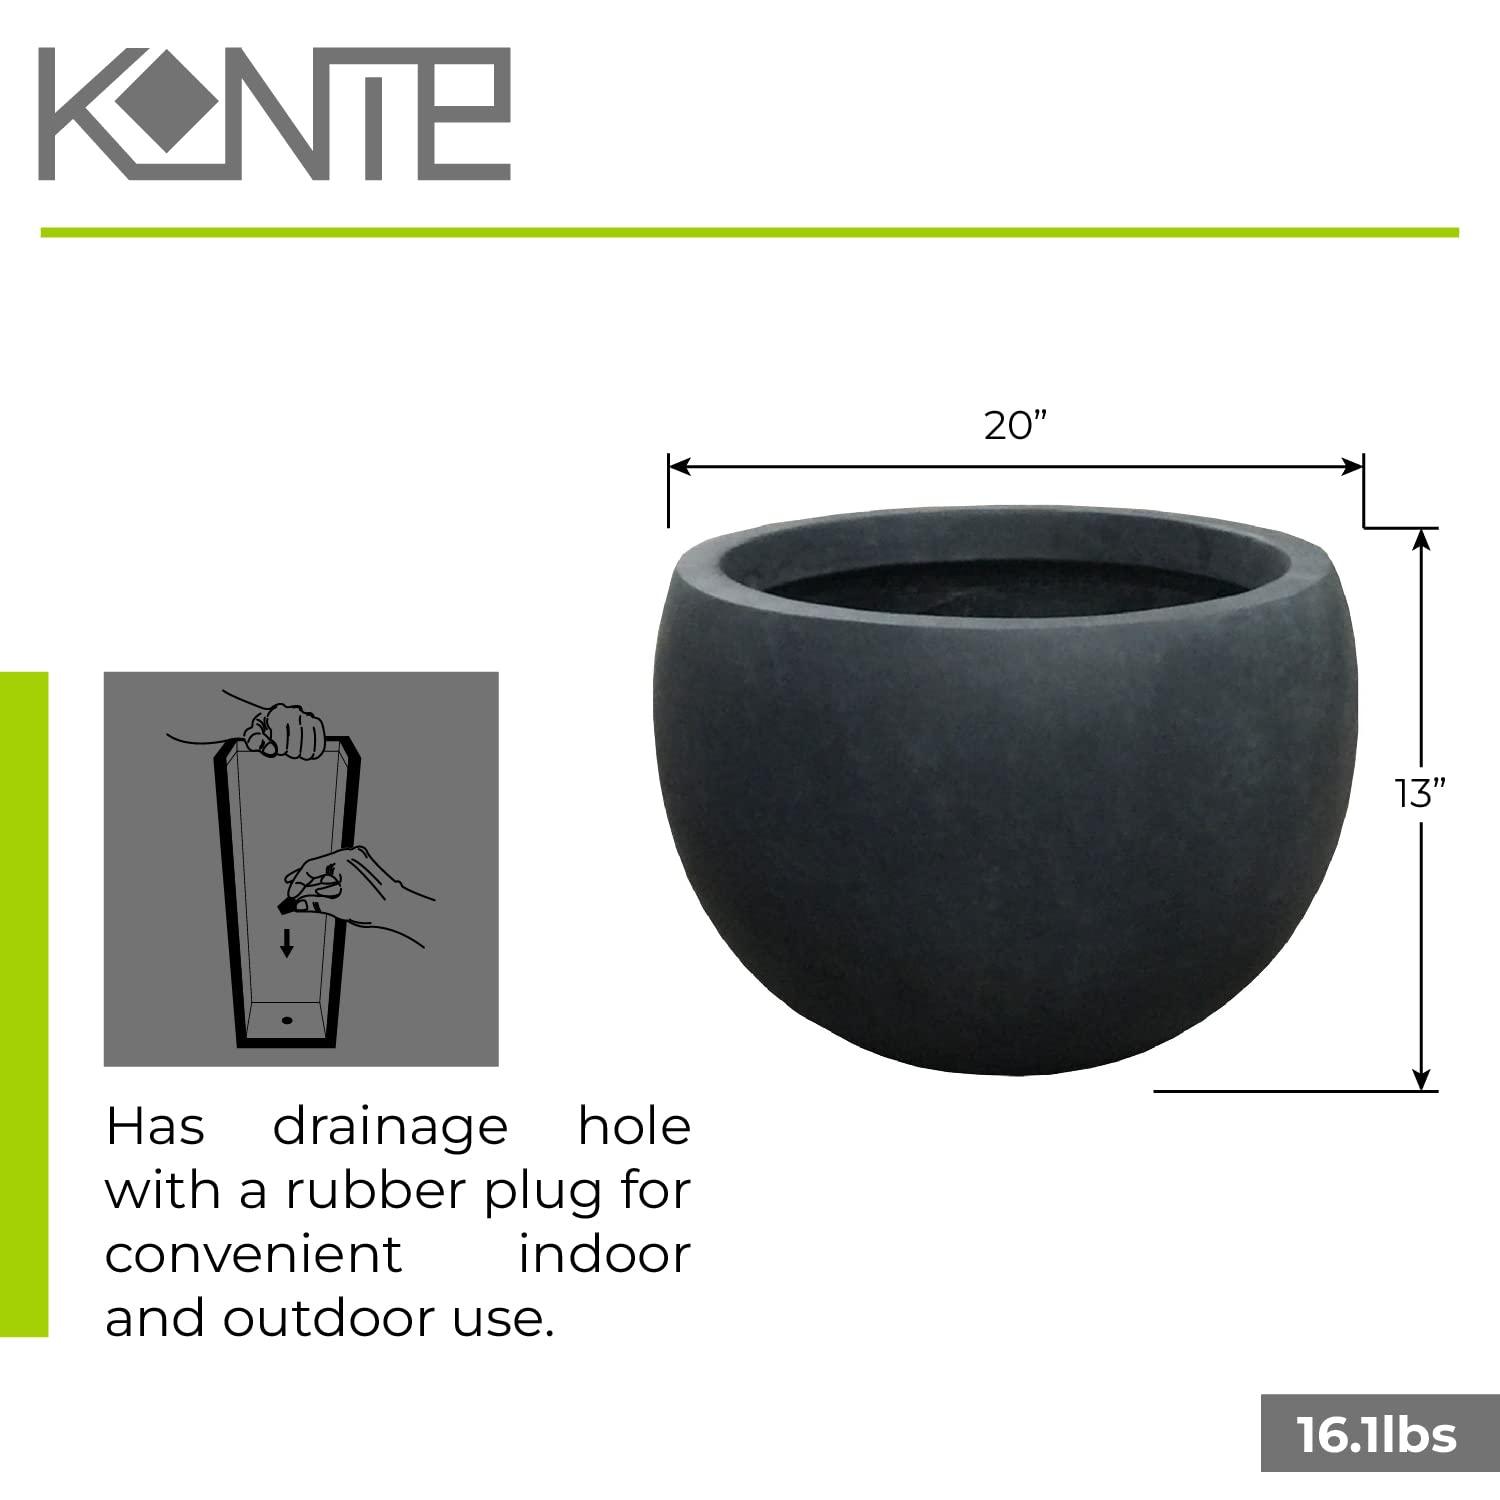 Kante 19.9" Dia Round Concrete Planter, Outdoor/Indoor Large Bowl Plant Pots with Drainage Hole and Rubber Plug for Garden Patio Balcony Home, Charcoal - CookCave